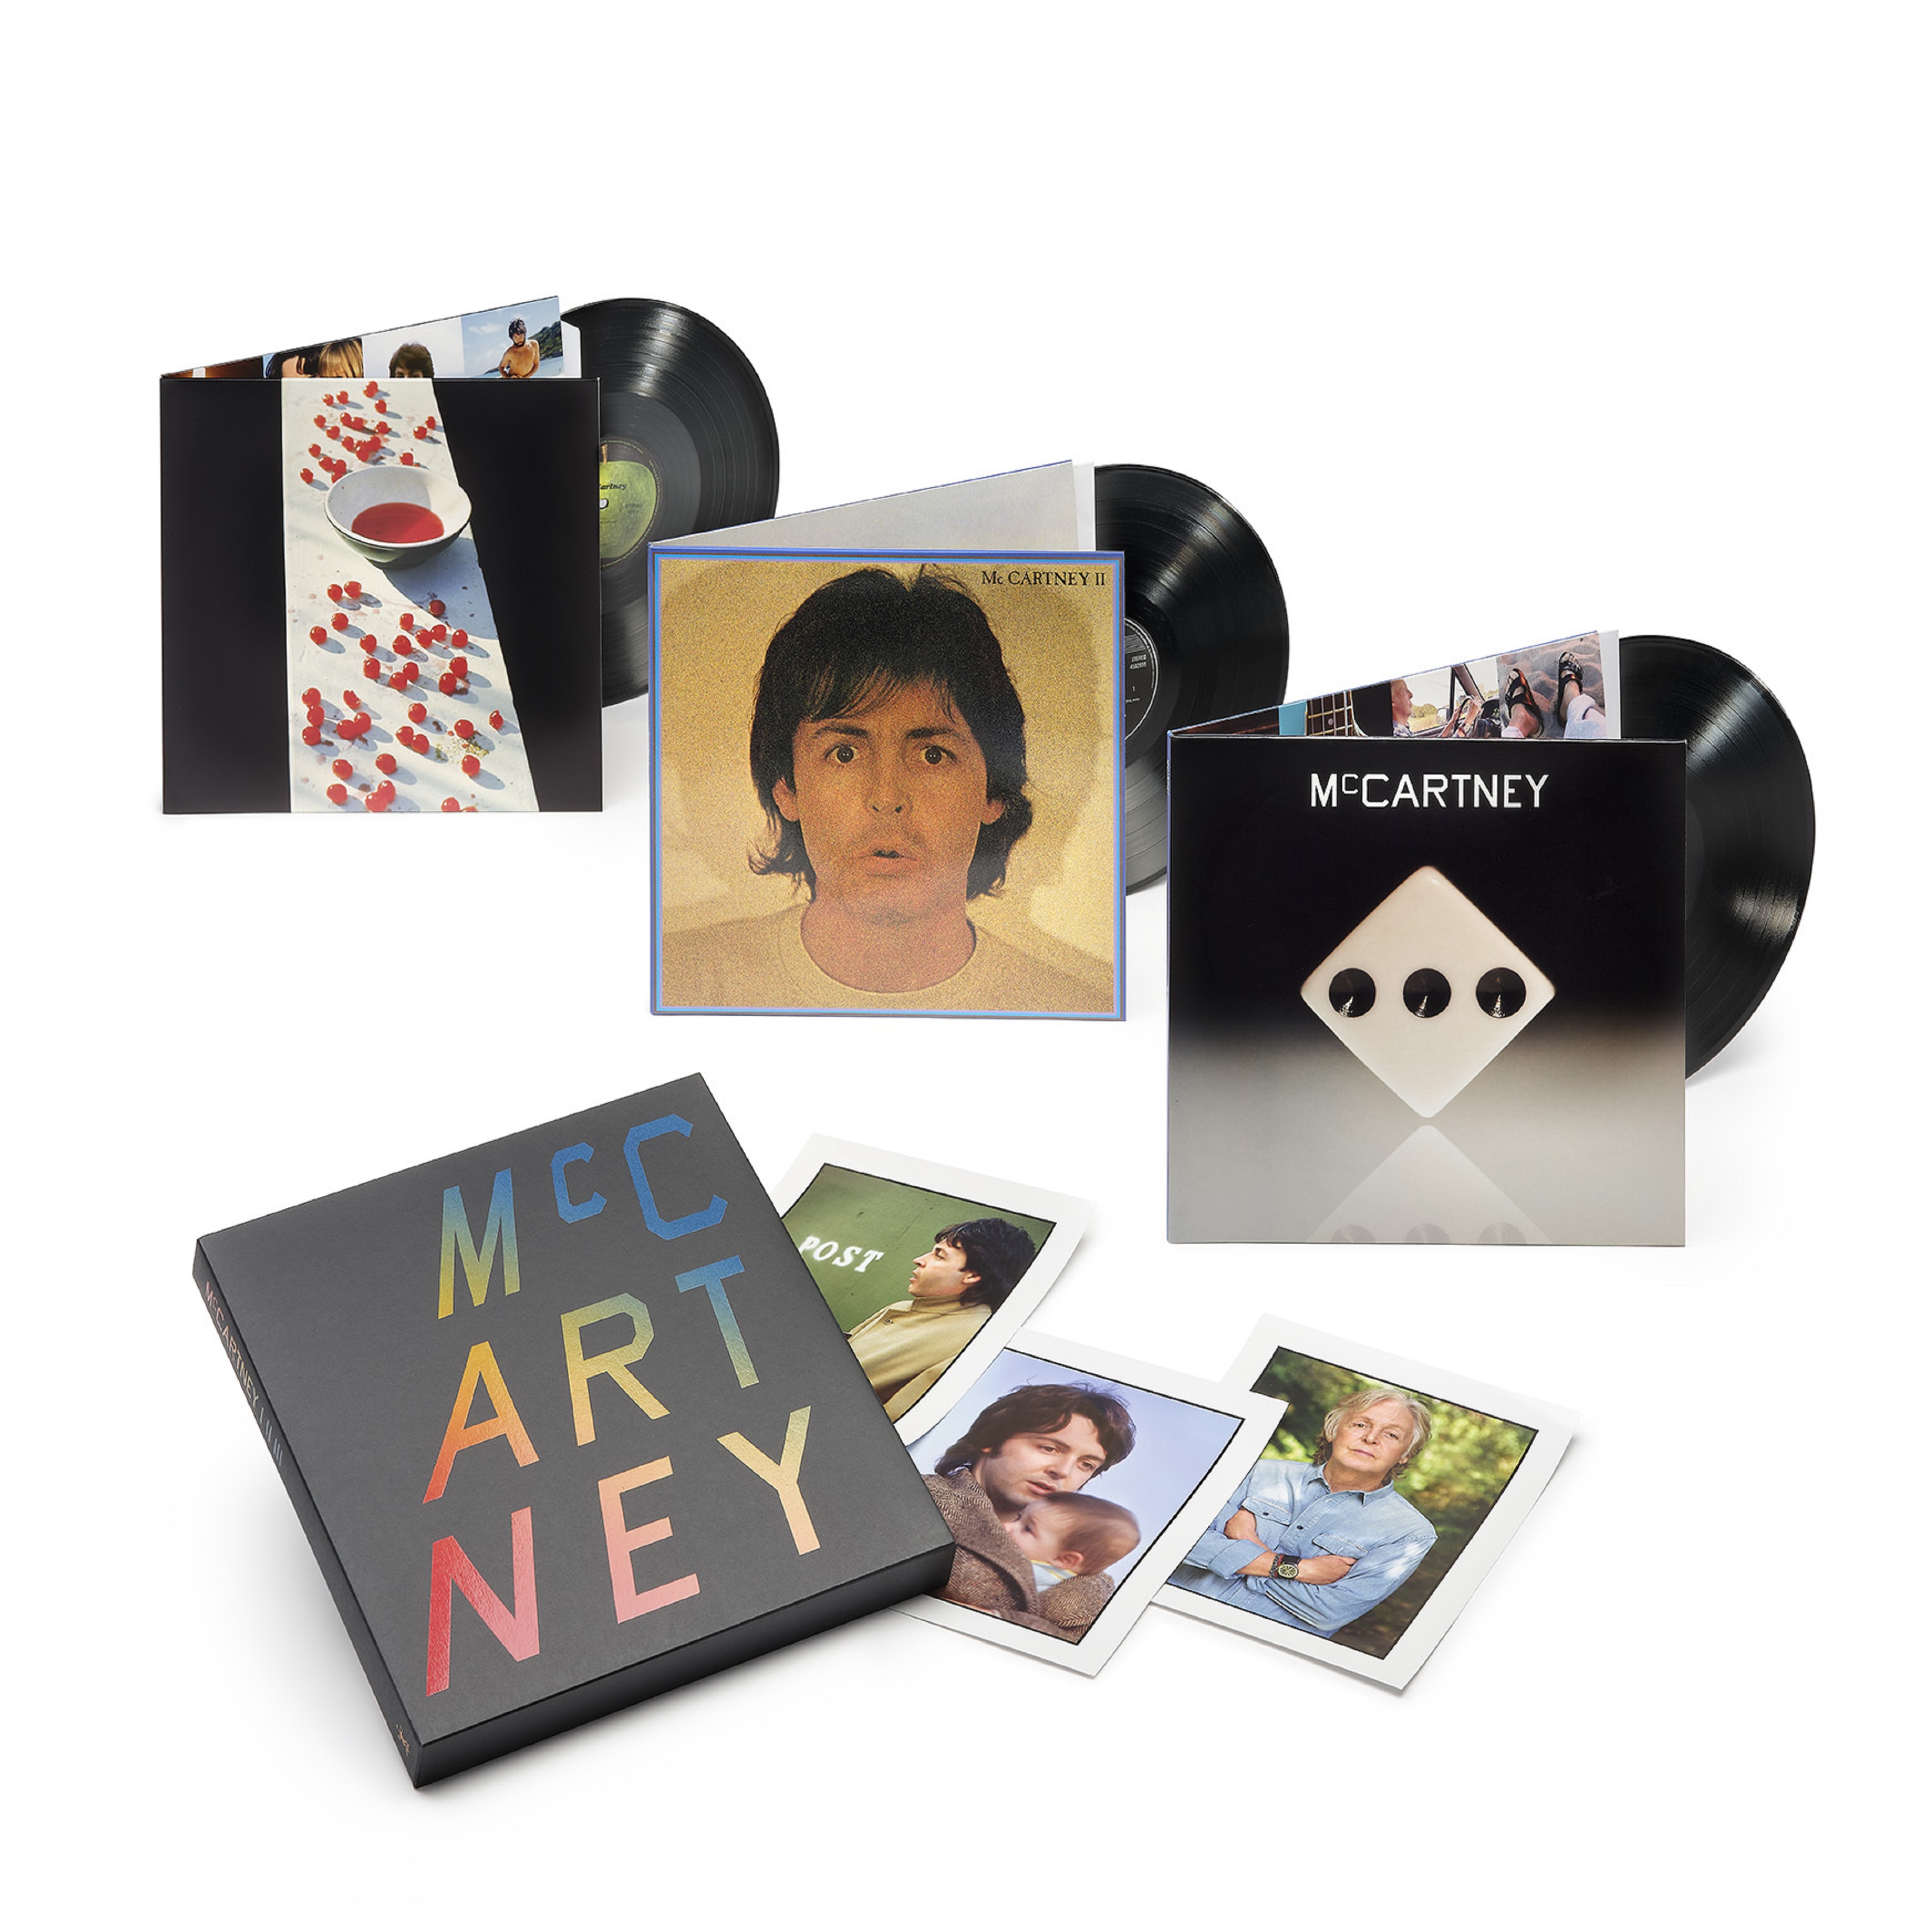 Paul McCartney - McCartney I II III Box Set - Paul’s three iconic solo albums (McCartney, McCartney II, and McCartney III) available together for the first time as a limited-edition box set